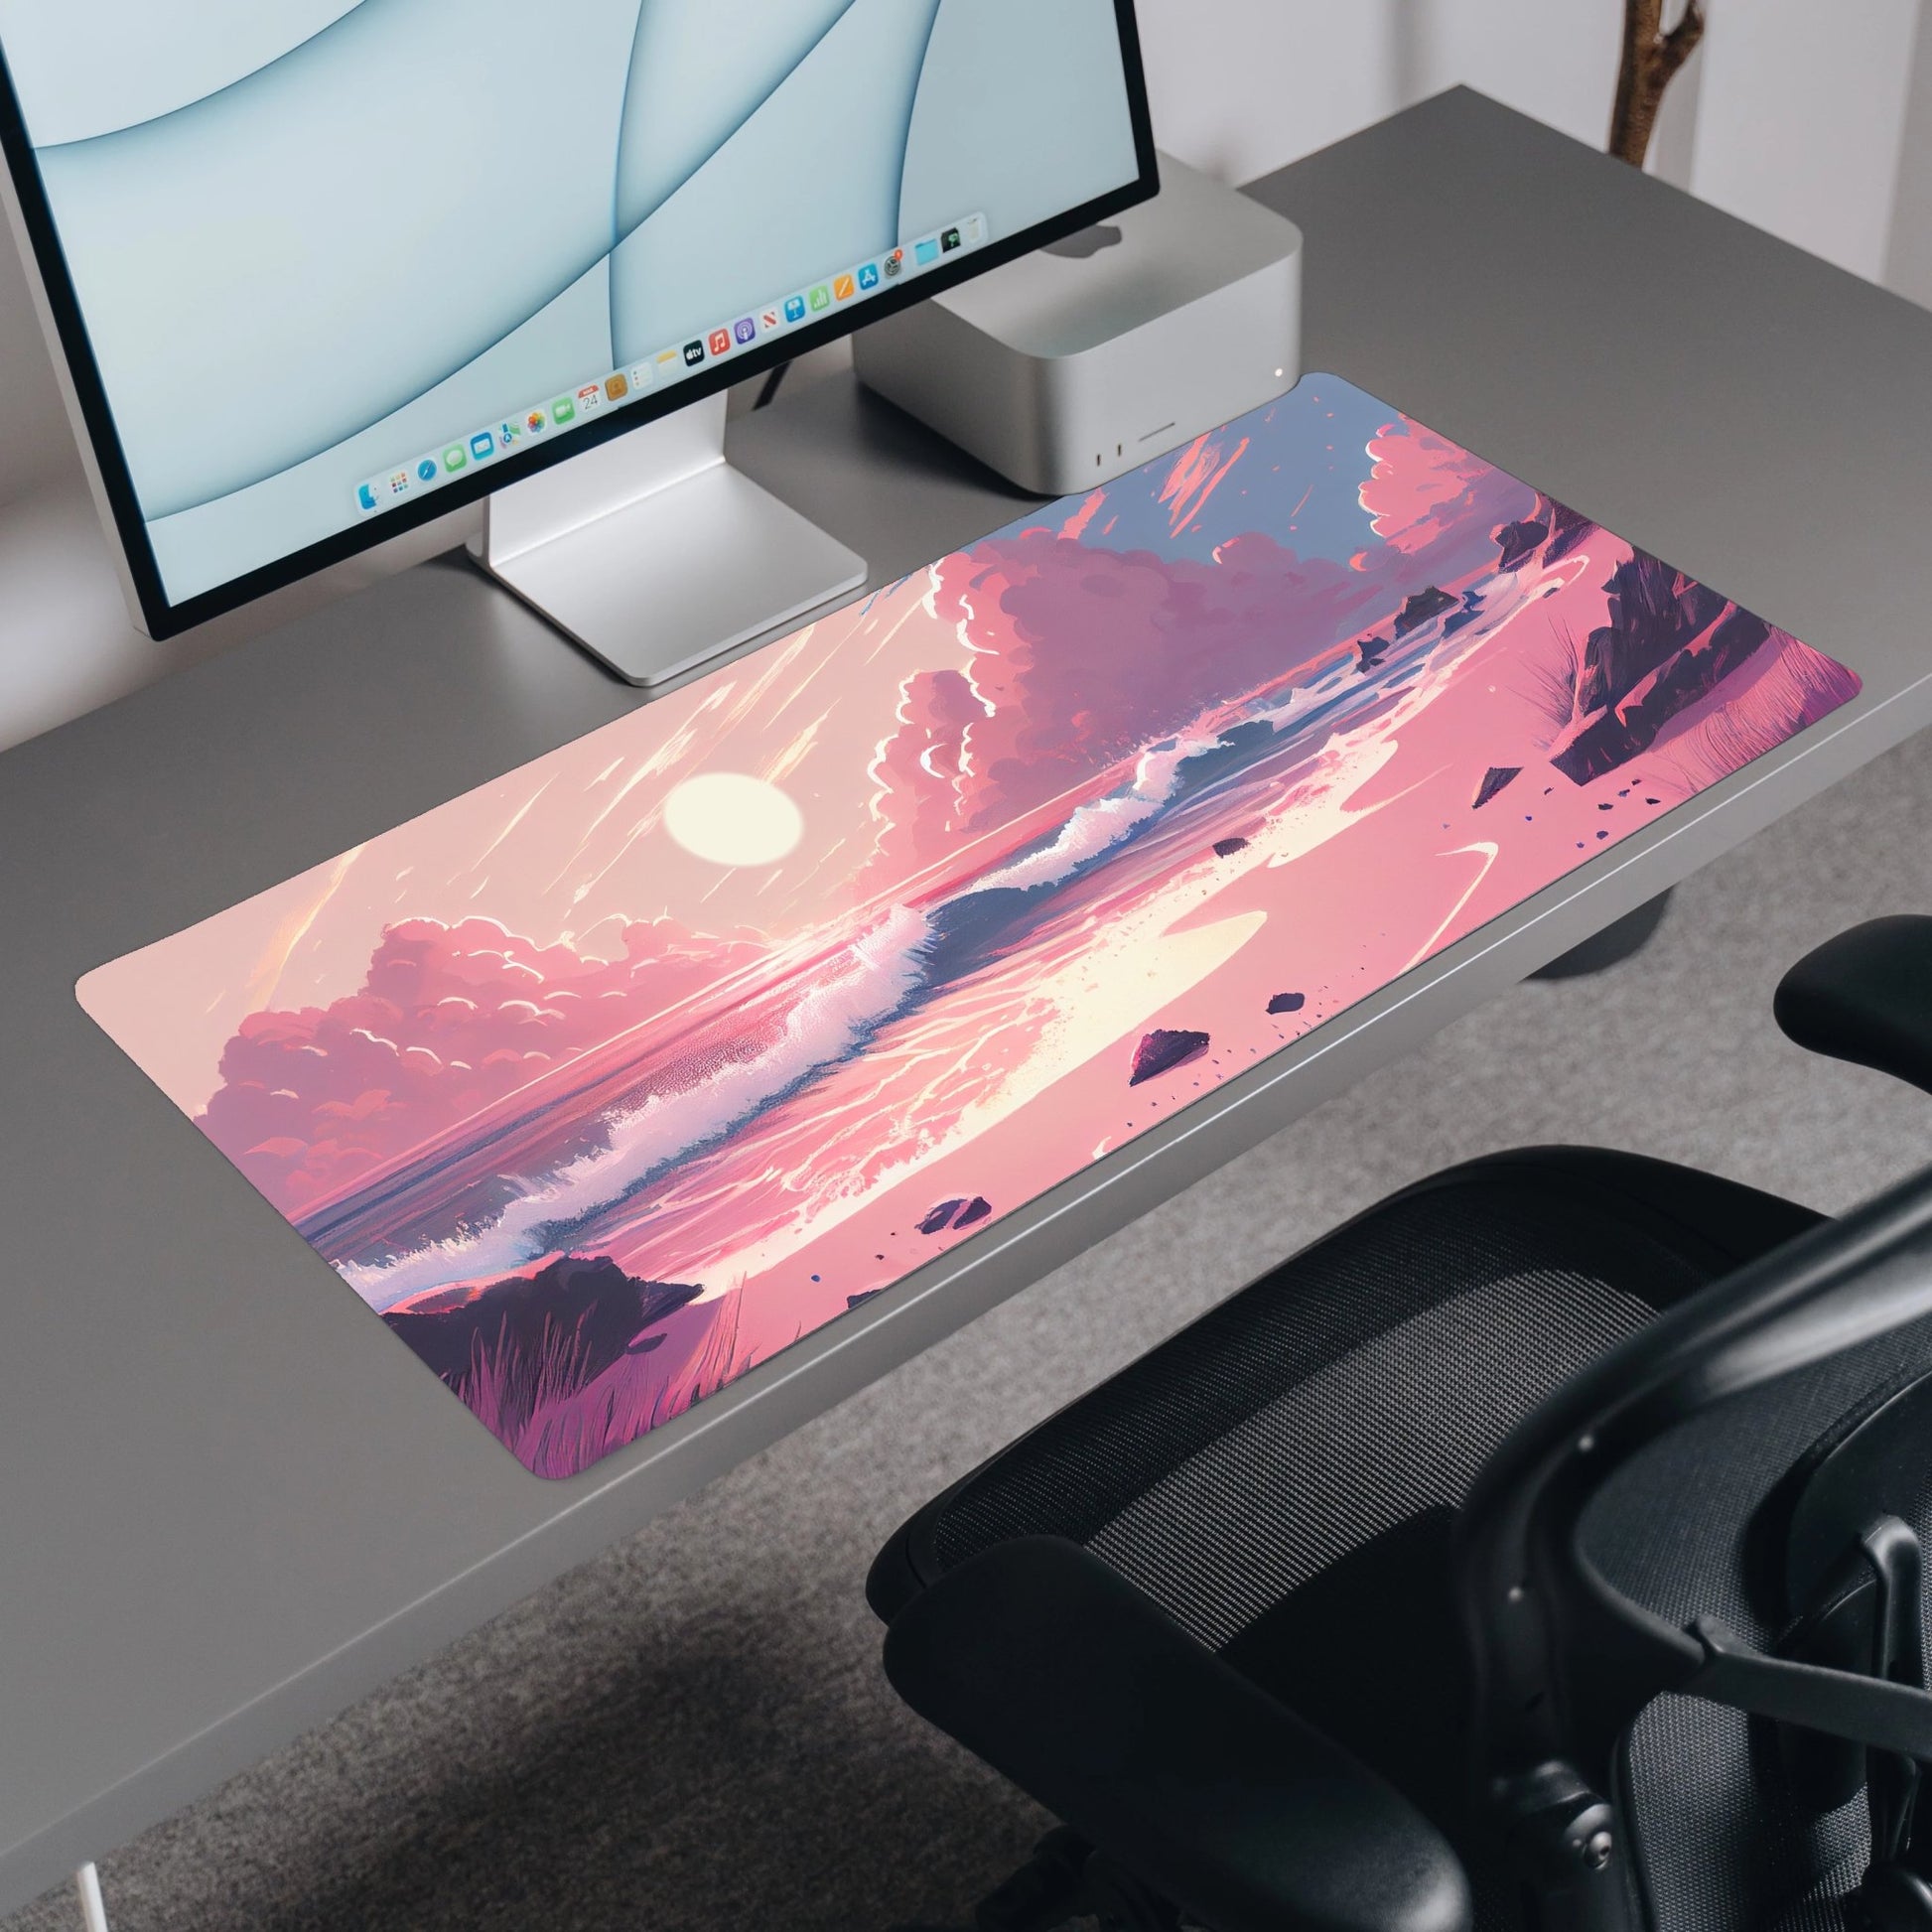 Character Mouse Pads & Desk Mats for Sale